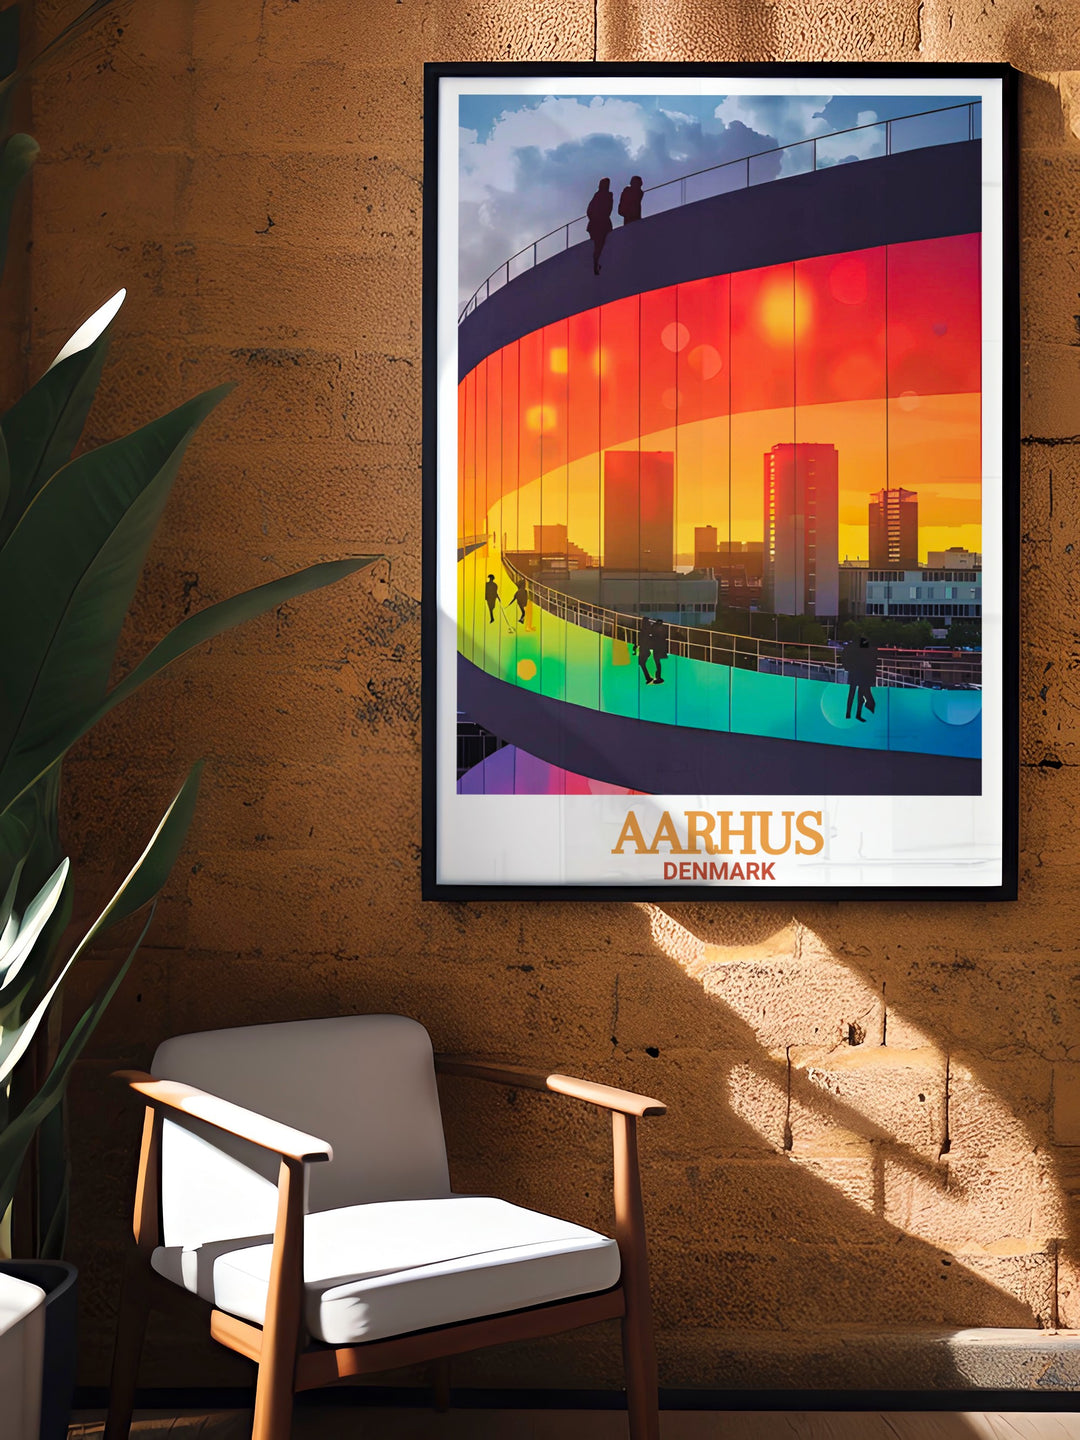 Enhance your home decor with ARoS Aarhus Art Museum travel posters. These Aarhus prints showcase the citys artistic elegance and are perfect for those who appreciate Denmarks rich history and vibrant art scene.